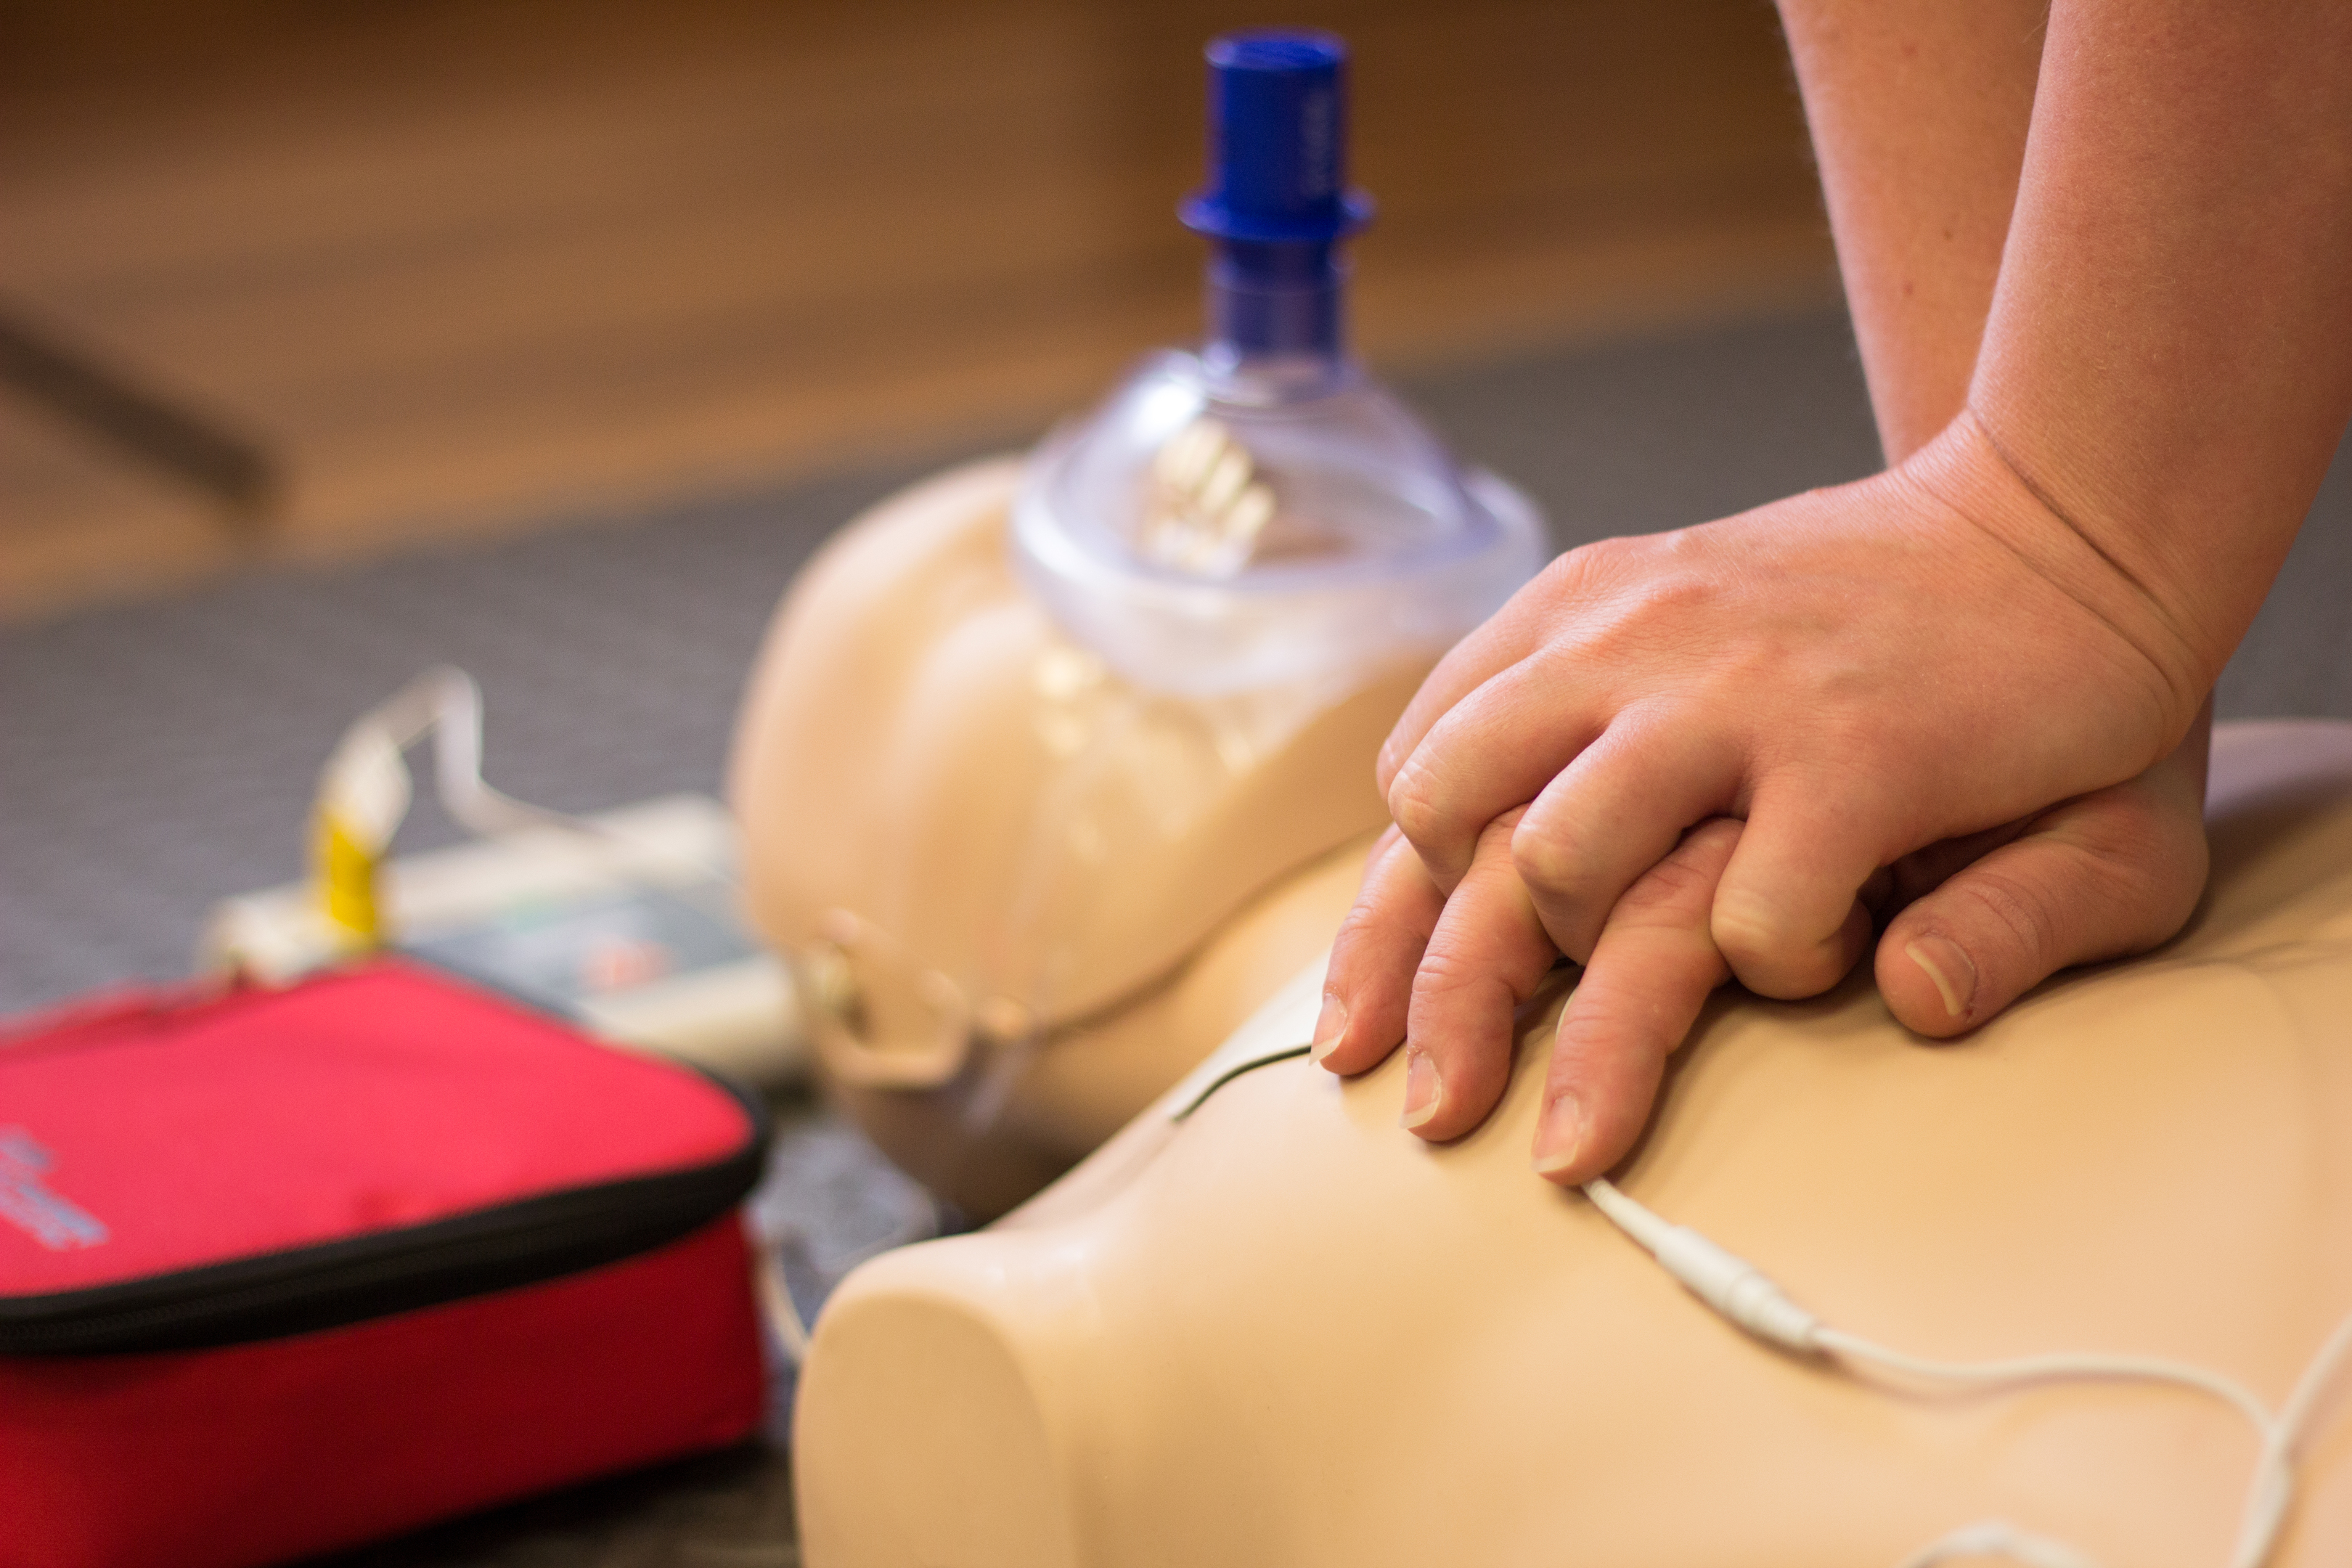 Crews across Scotland have saved dozens of lives since the launch of a trial allowing them to help cardiac arrest victims if they can arrive at the scene before paramedics (iStock)